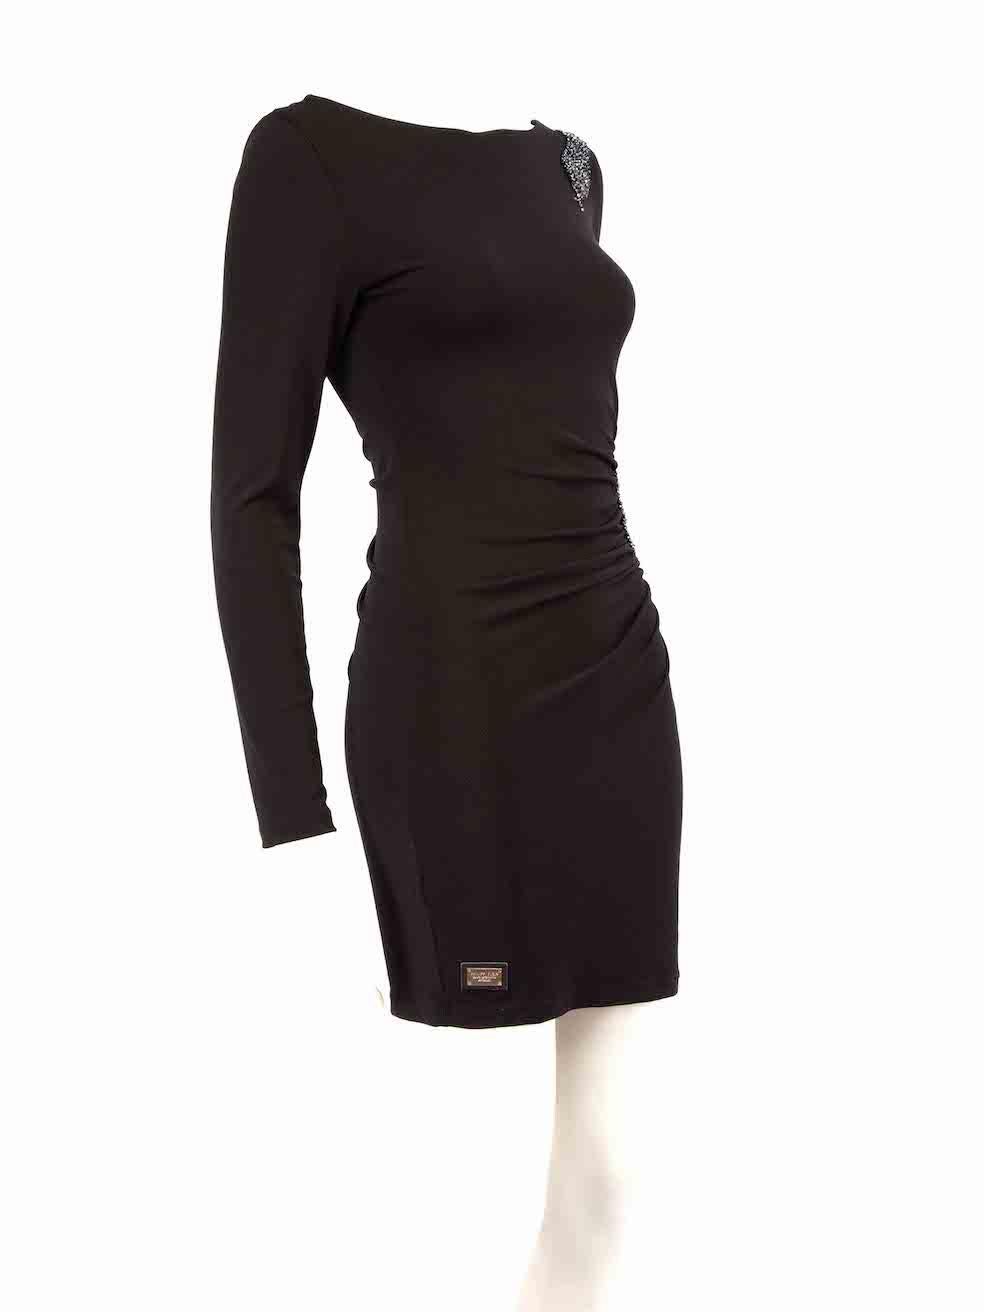 CONDITION is Very good. Minimal wear to dress is evident. Minimal wear to the right side seam with loosening of the stitching on this used Philipp Plein designer resale item.
 
 
 
 Details
 
 
 Black
 
 Polyester
 
 Dress
 
 Long sleeves
 
 Mini
 
